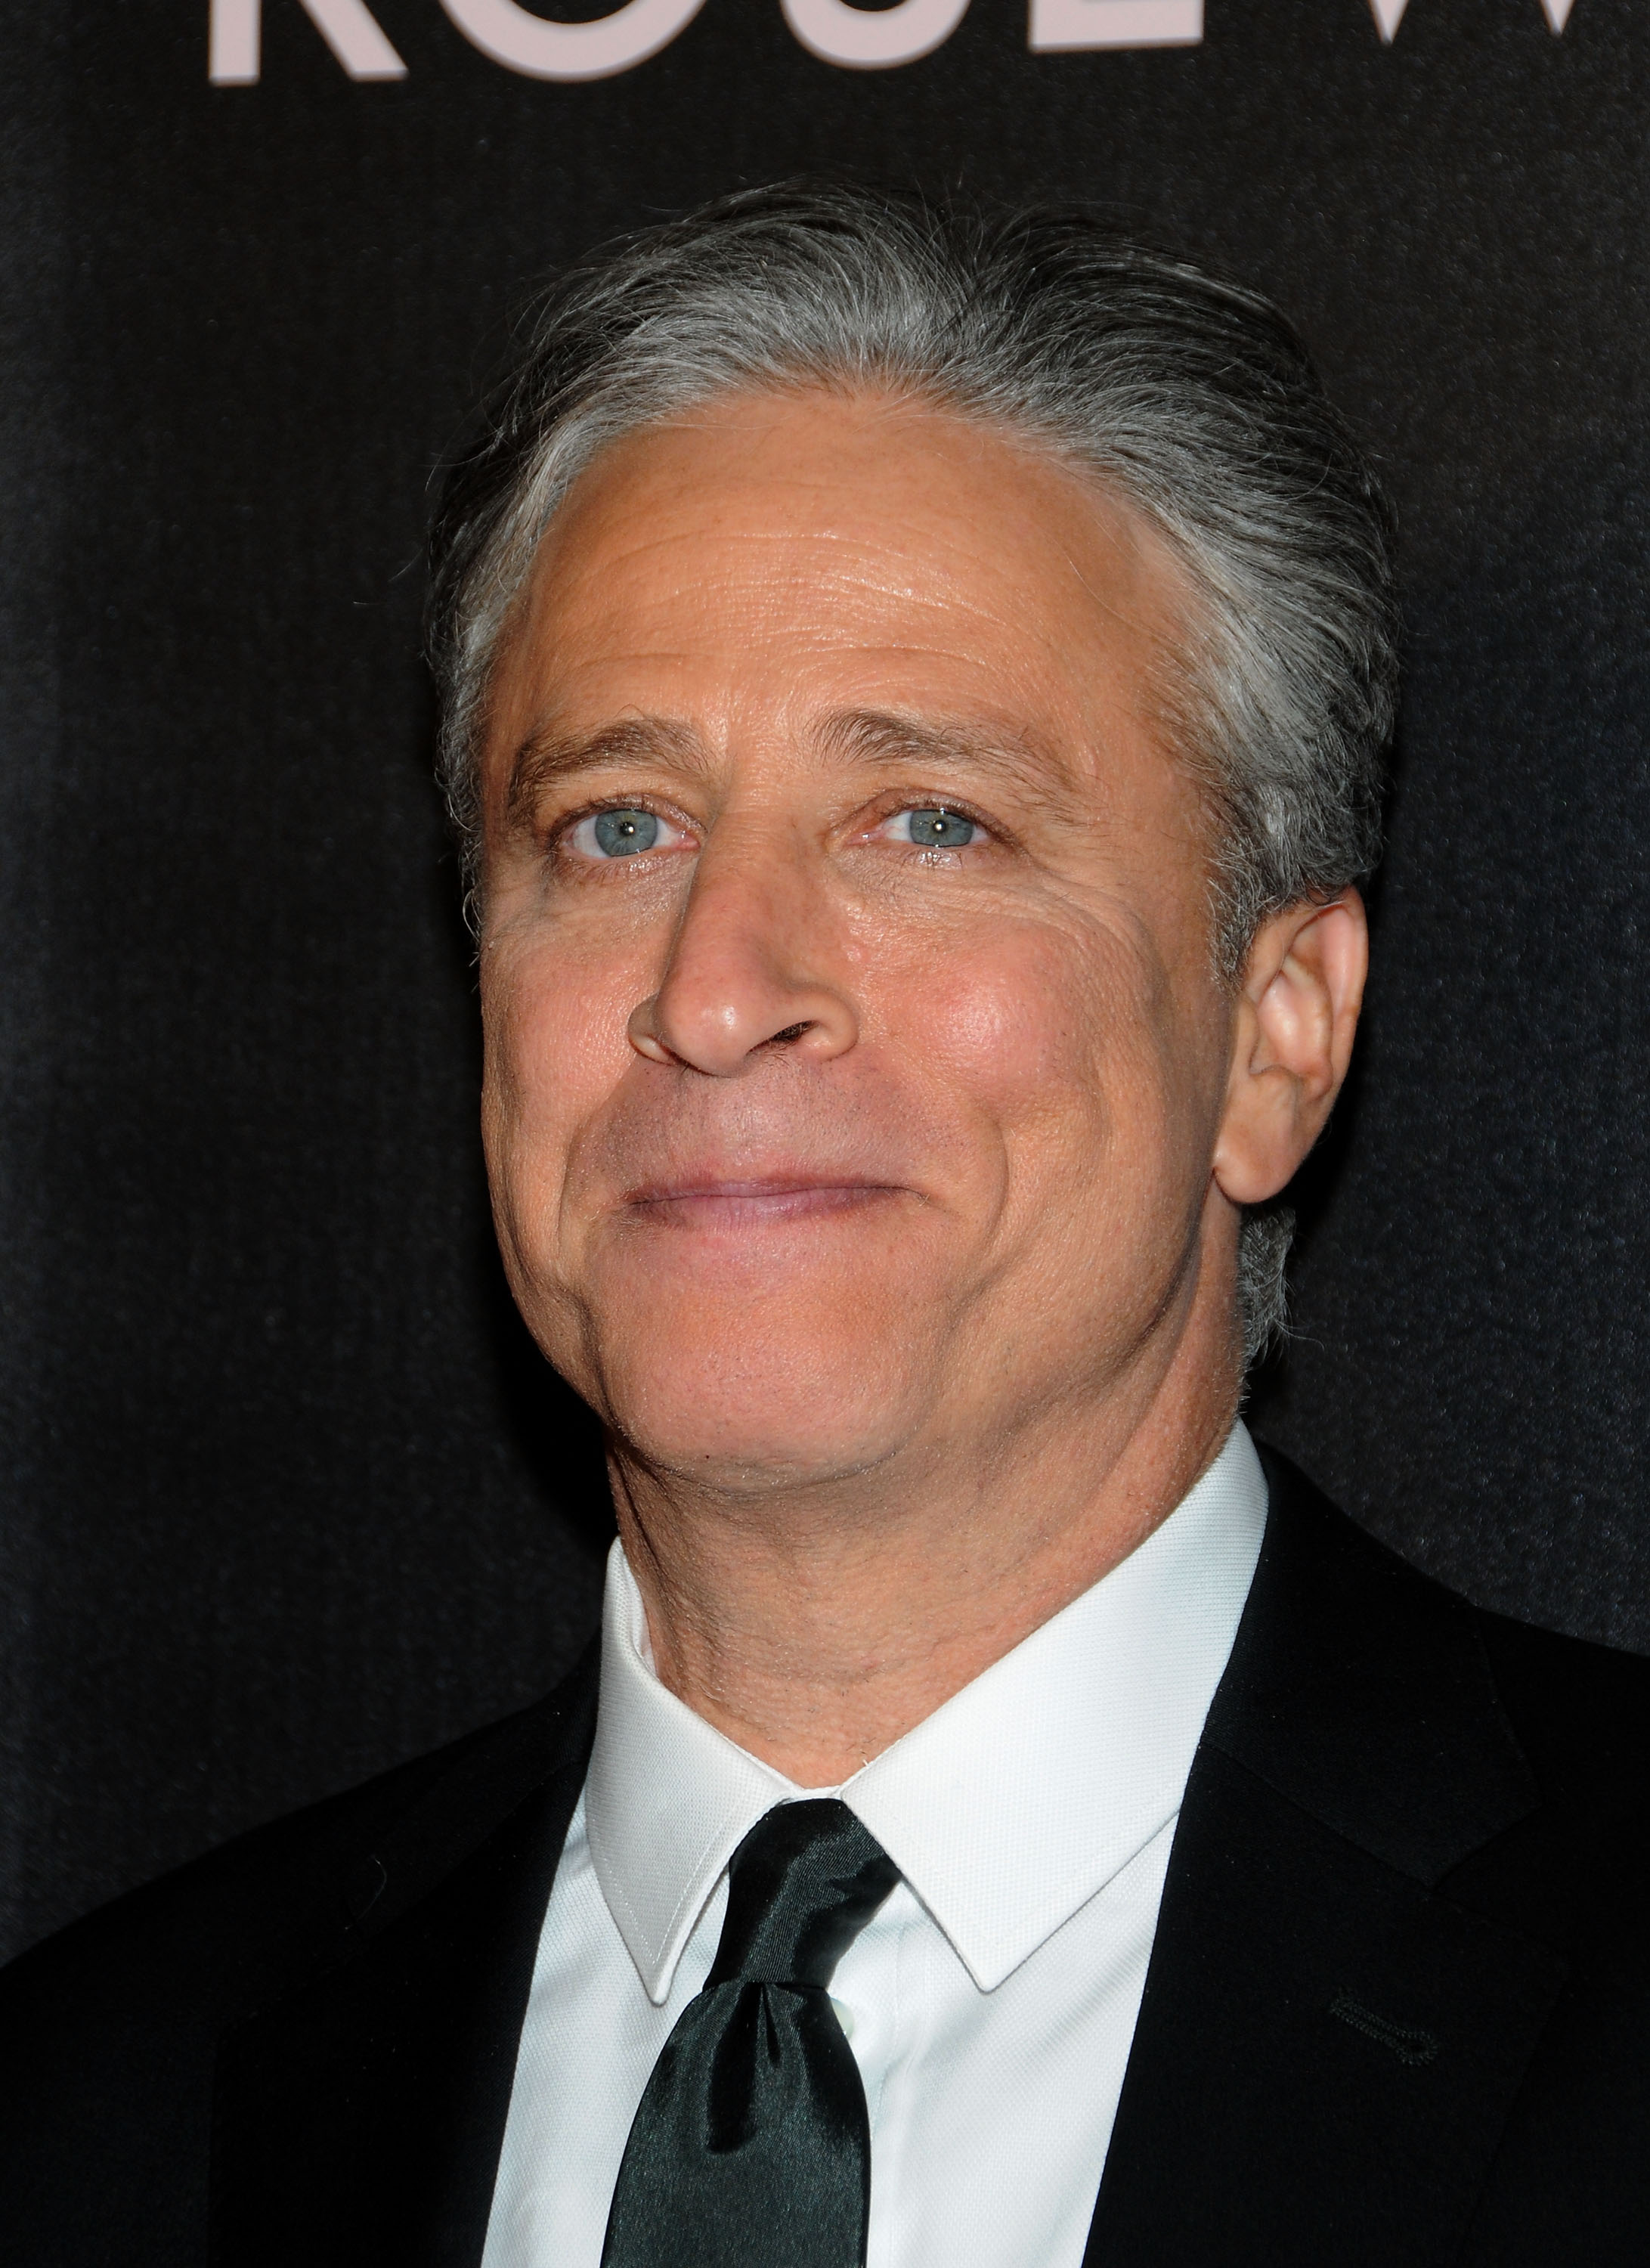 Director/writer/producer Jon Stewart attends "Rosewater" New York Premiere at AMC Lincoln Square Theater on November 12, 2014 in New York City. (Desiree Navarro—WireImage/Getty Images)